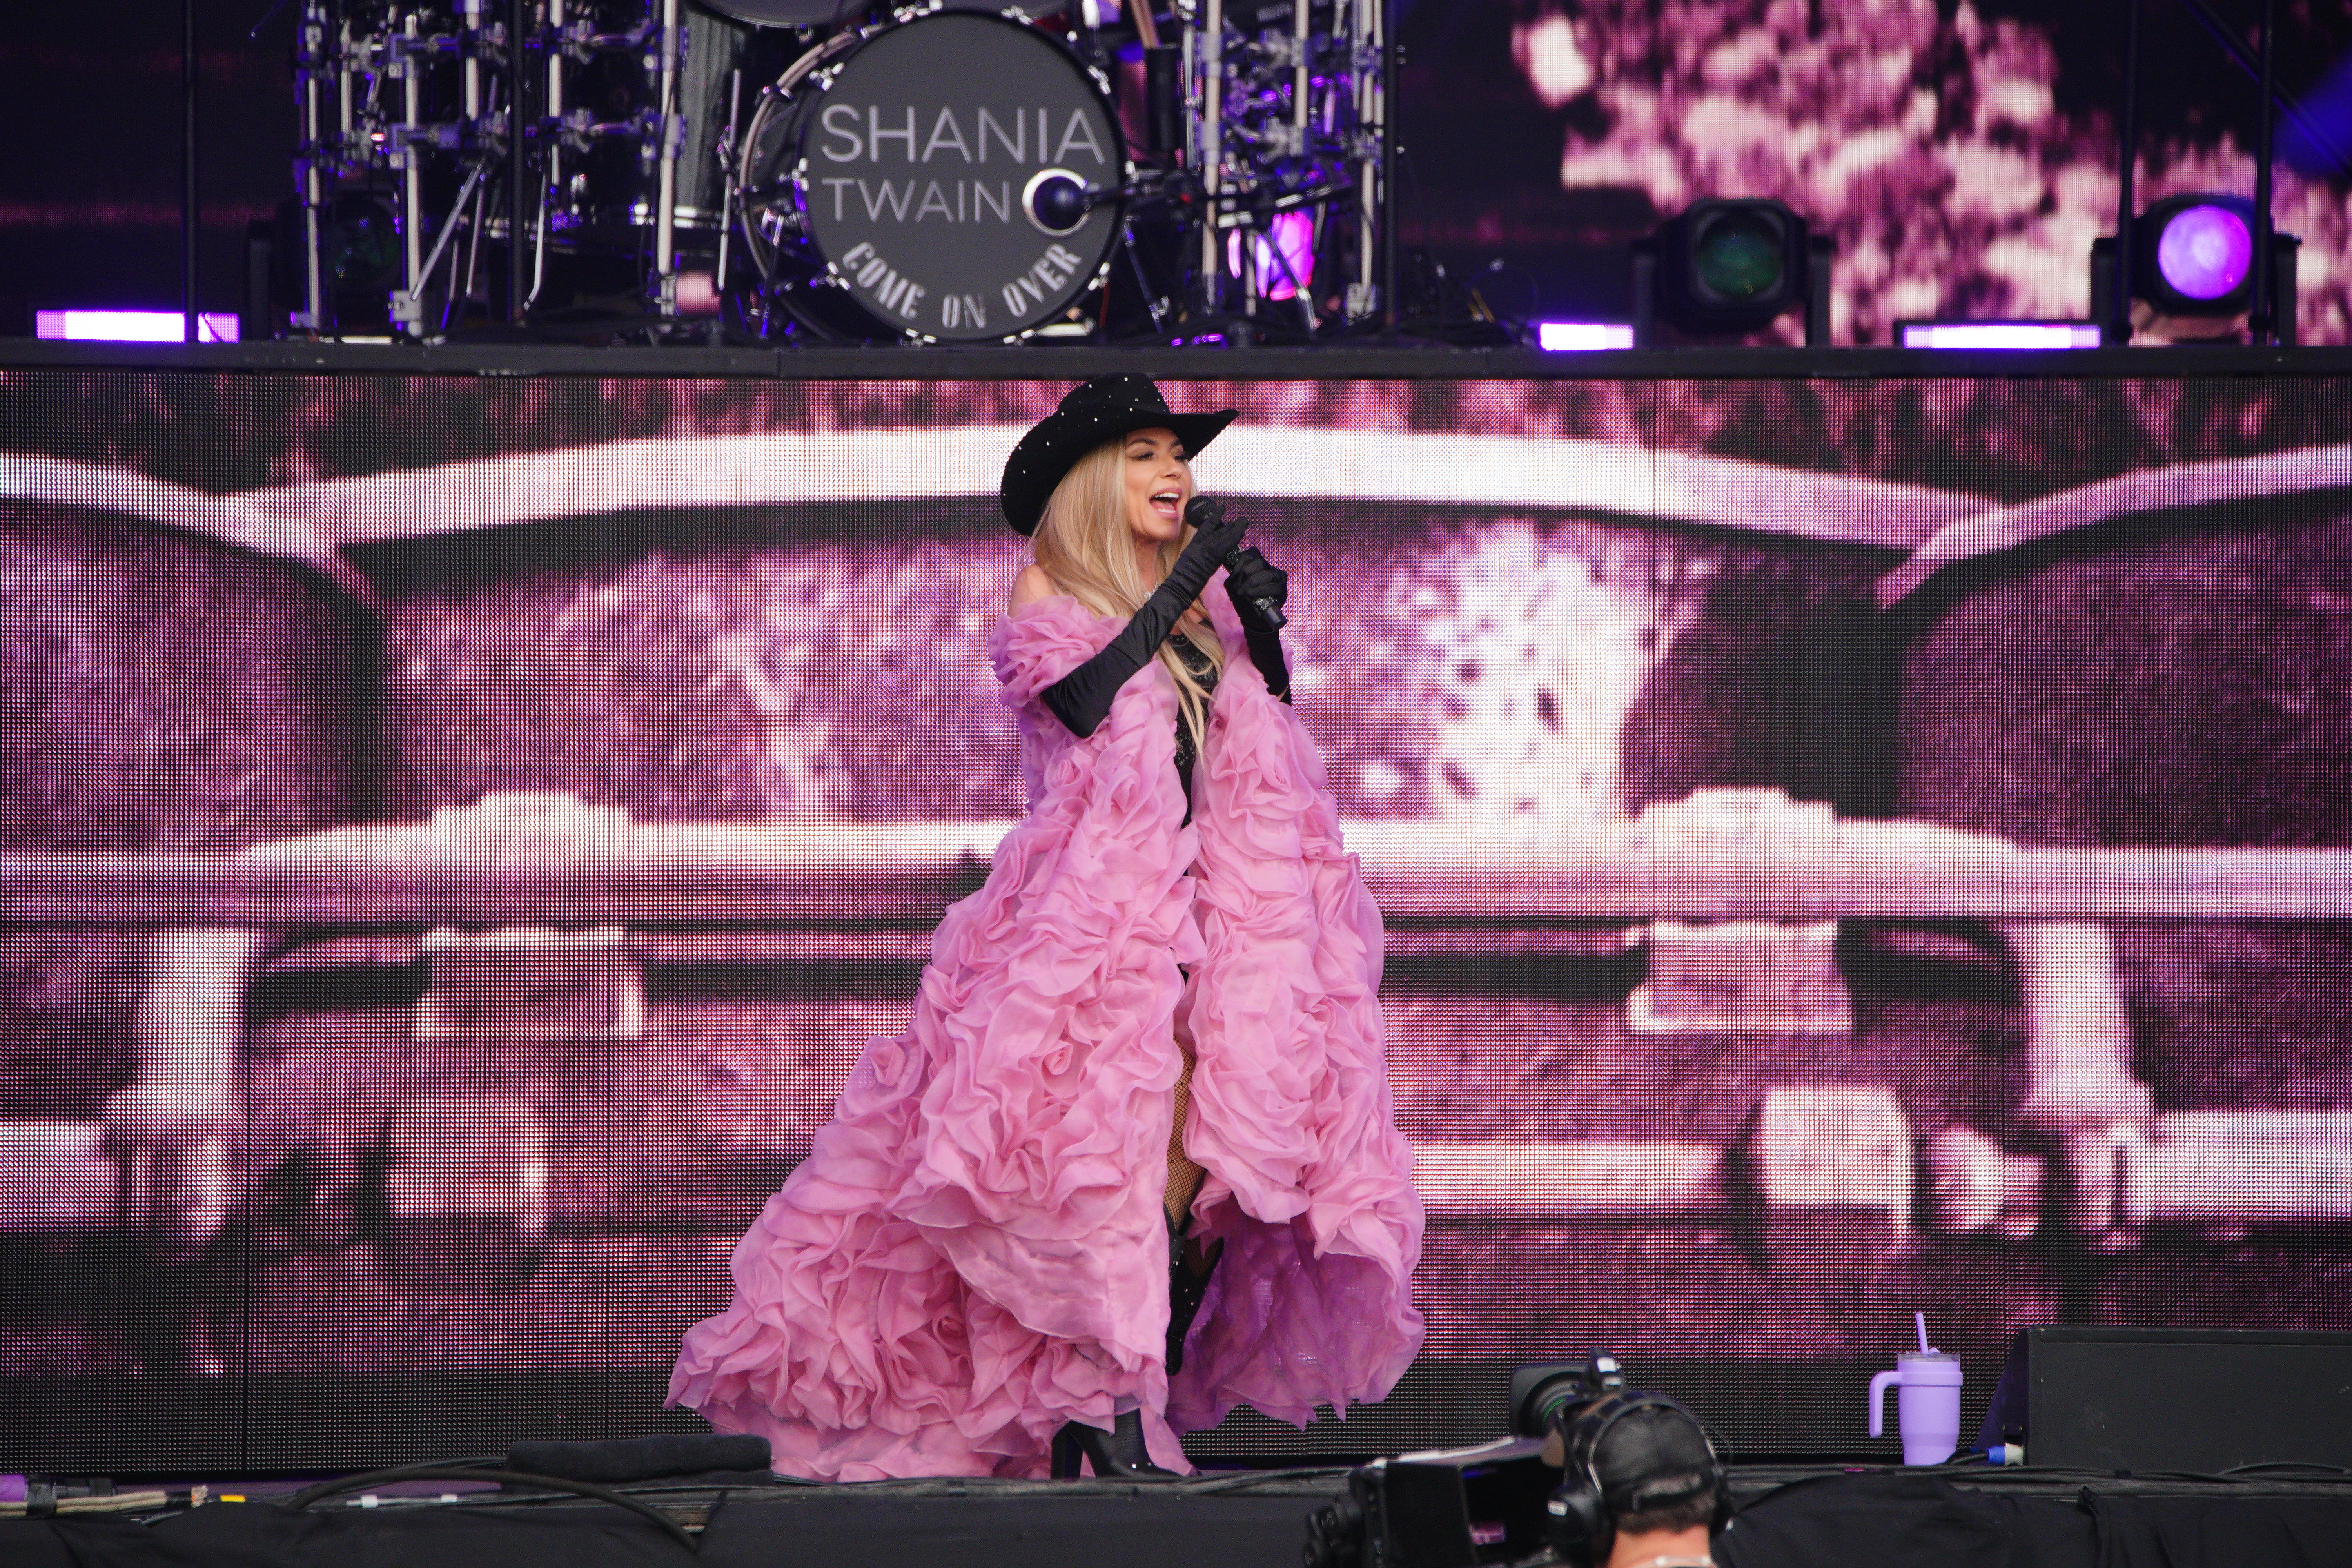 Shania Twain performing on the Pyramid Stage